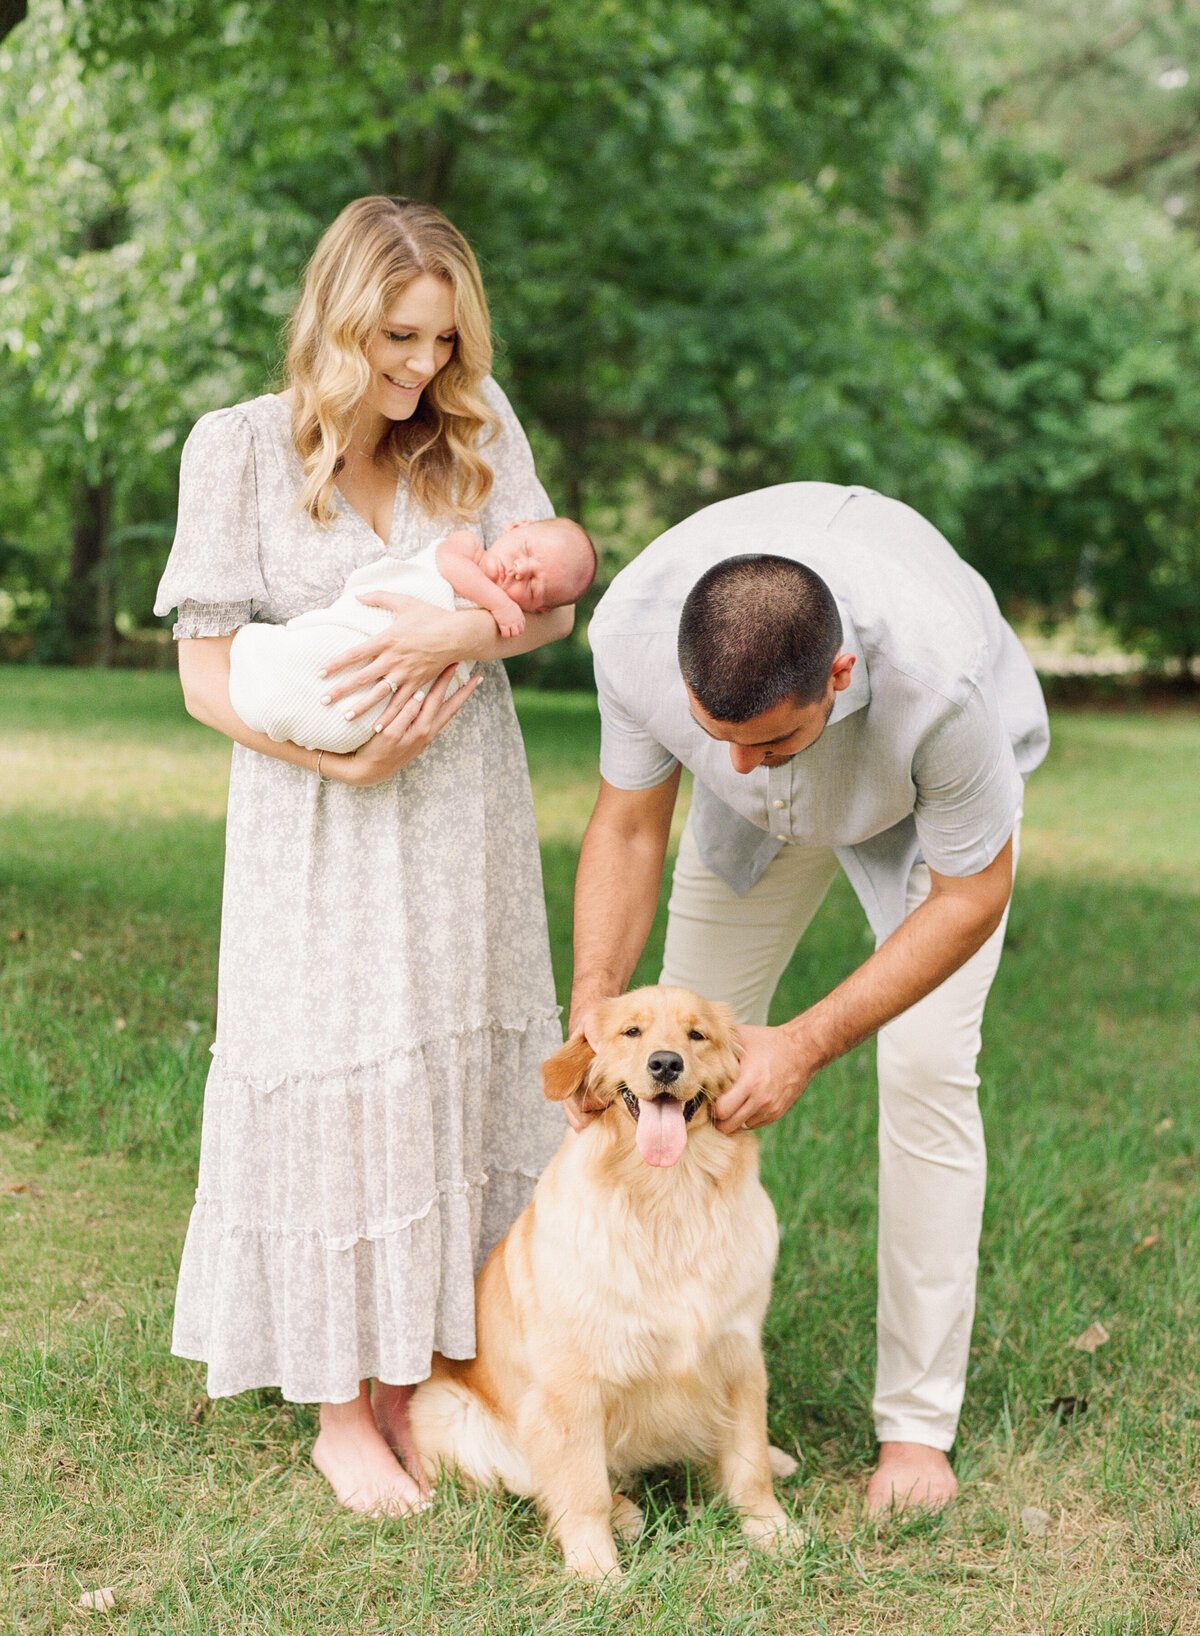 Family plays with their dog during their Knightdale newborn session .Photographed by Raleigh Newborn Photographer A.J. Dunlap Photography.